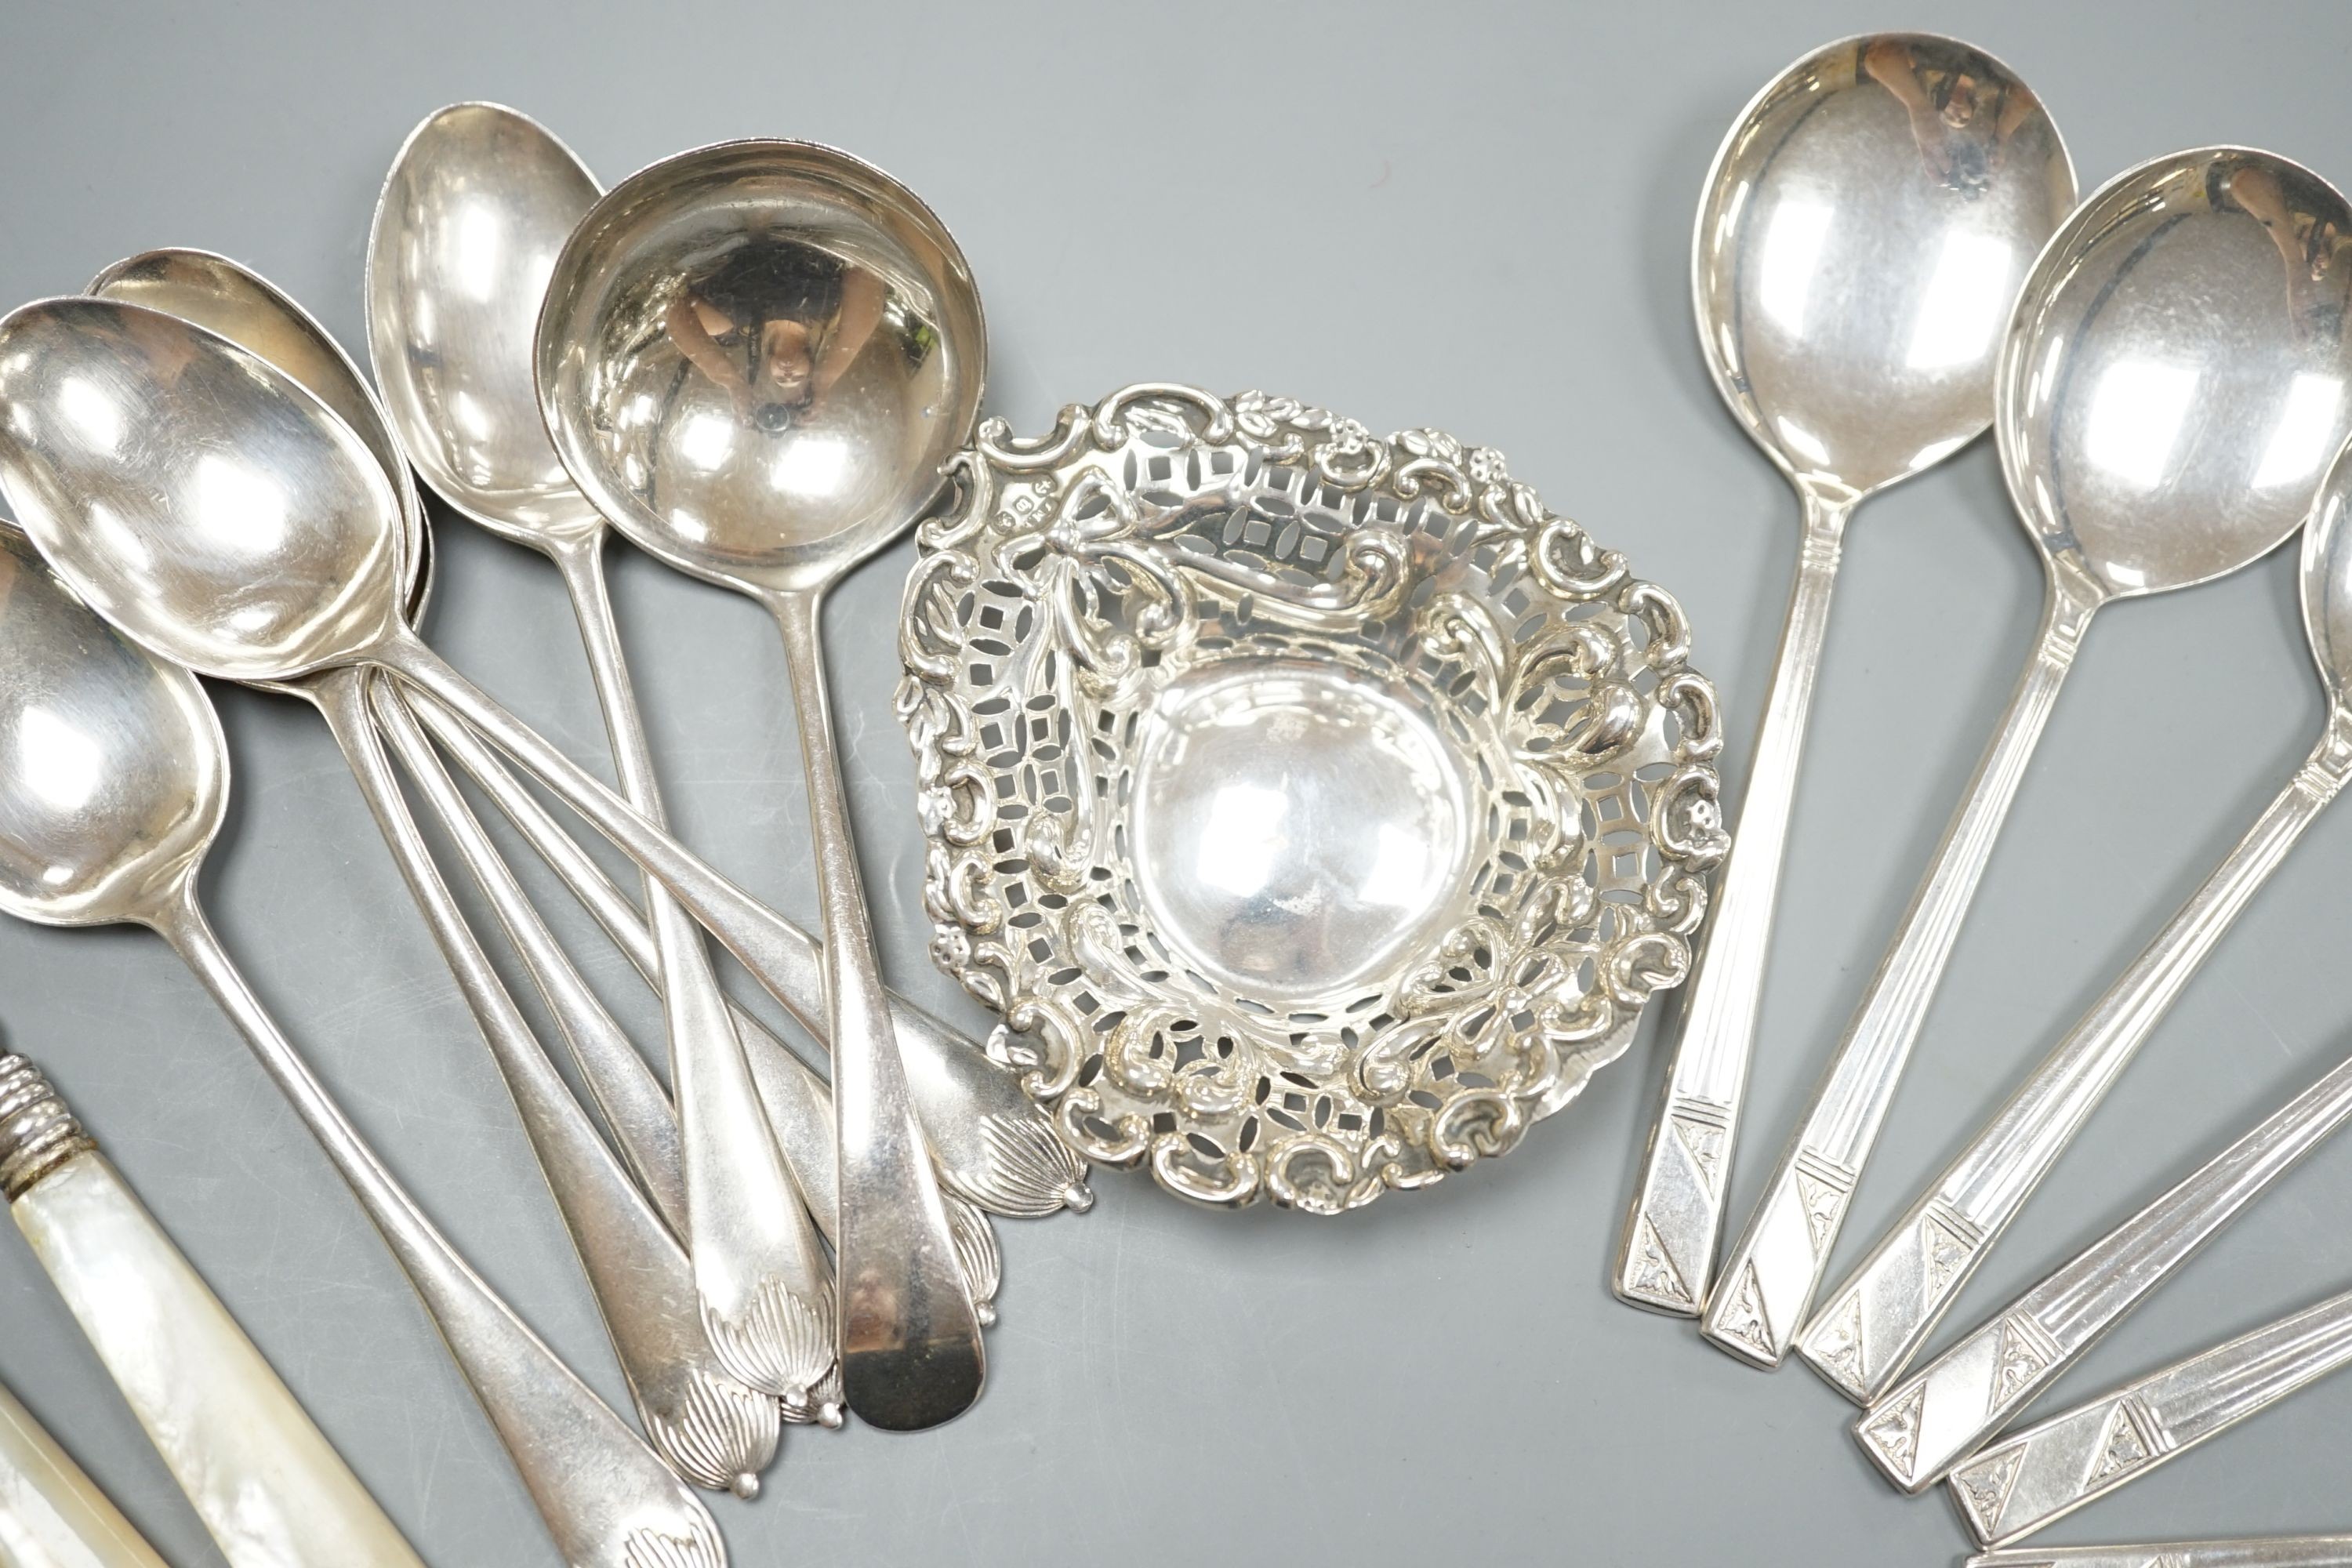 A late Victorian repousse silver bonbon dish, 91mm an assorted silver cutlery including three Victorian mother of pearl handled butter knives, a sauce ladle and two sets of six spoons including soup, weighable silver 11.